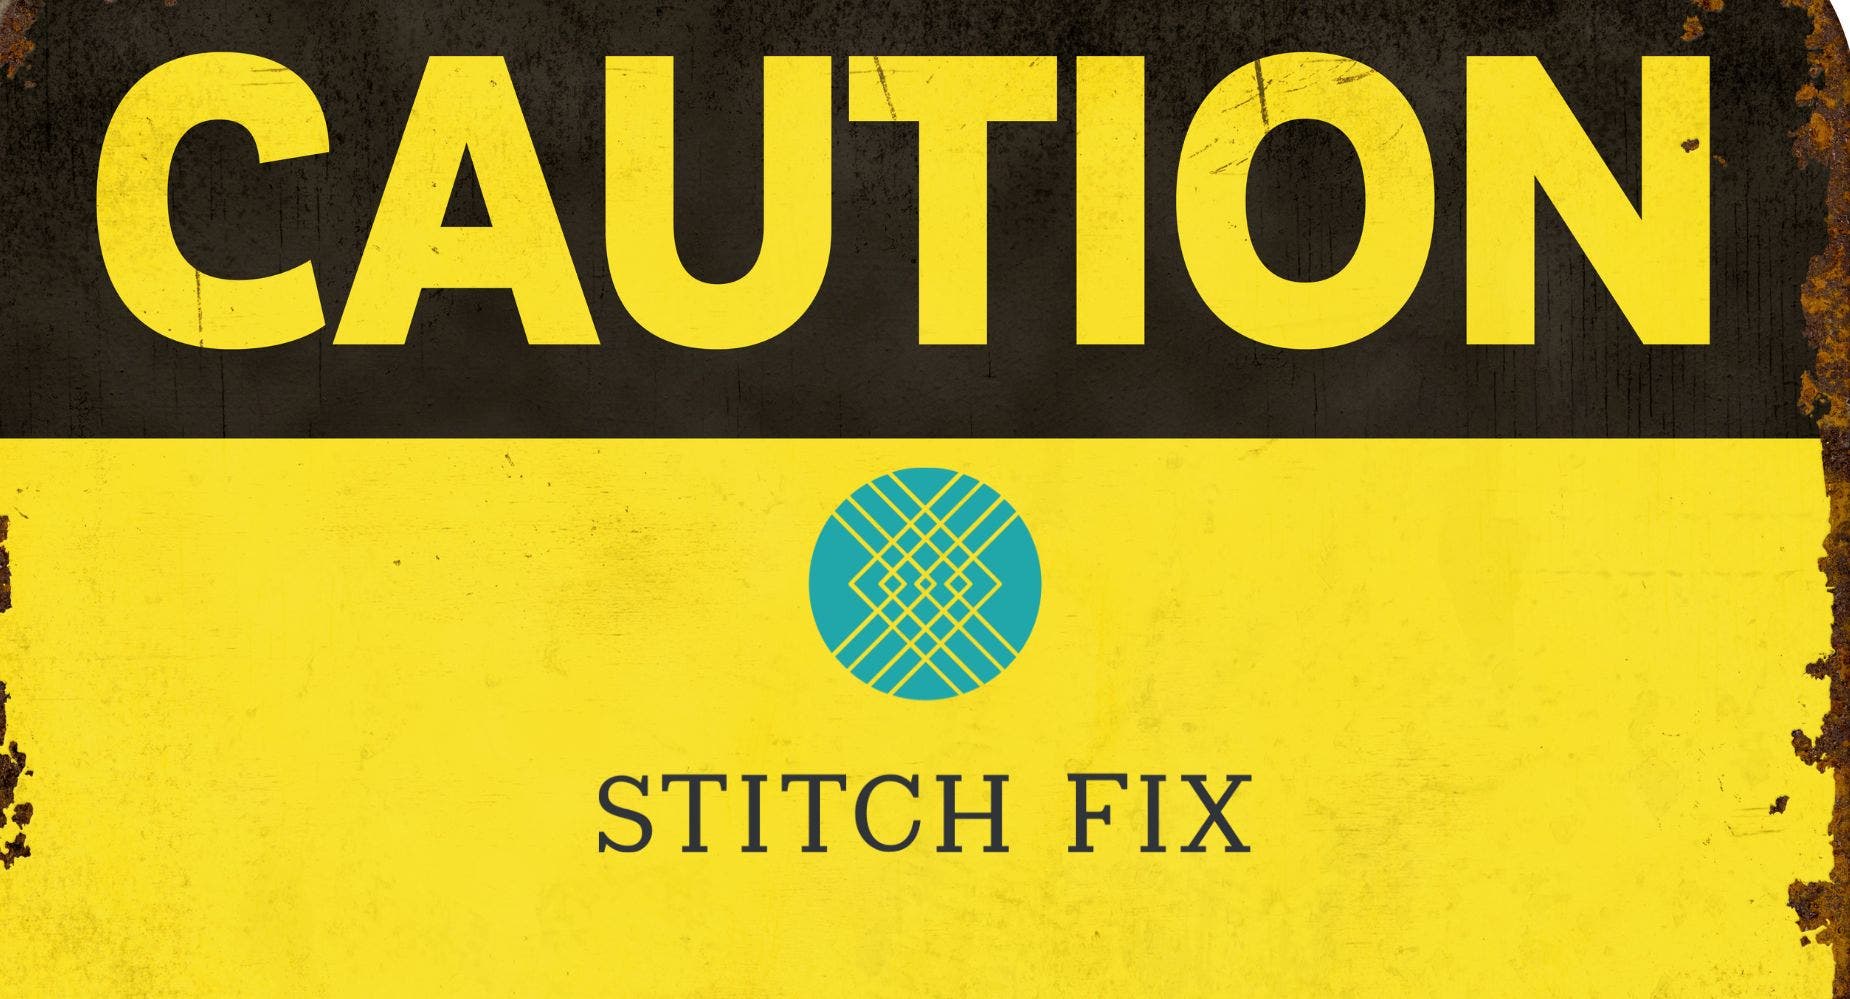 Why 3 Stitch Fix Analysts Remain Cautious After F1Q Print: 'A Challenging Turnaround Amidst A Tough Macro Environment'